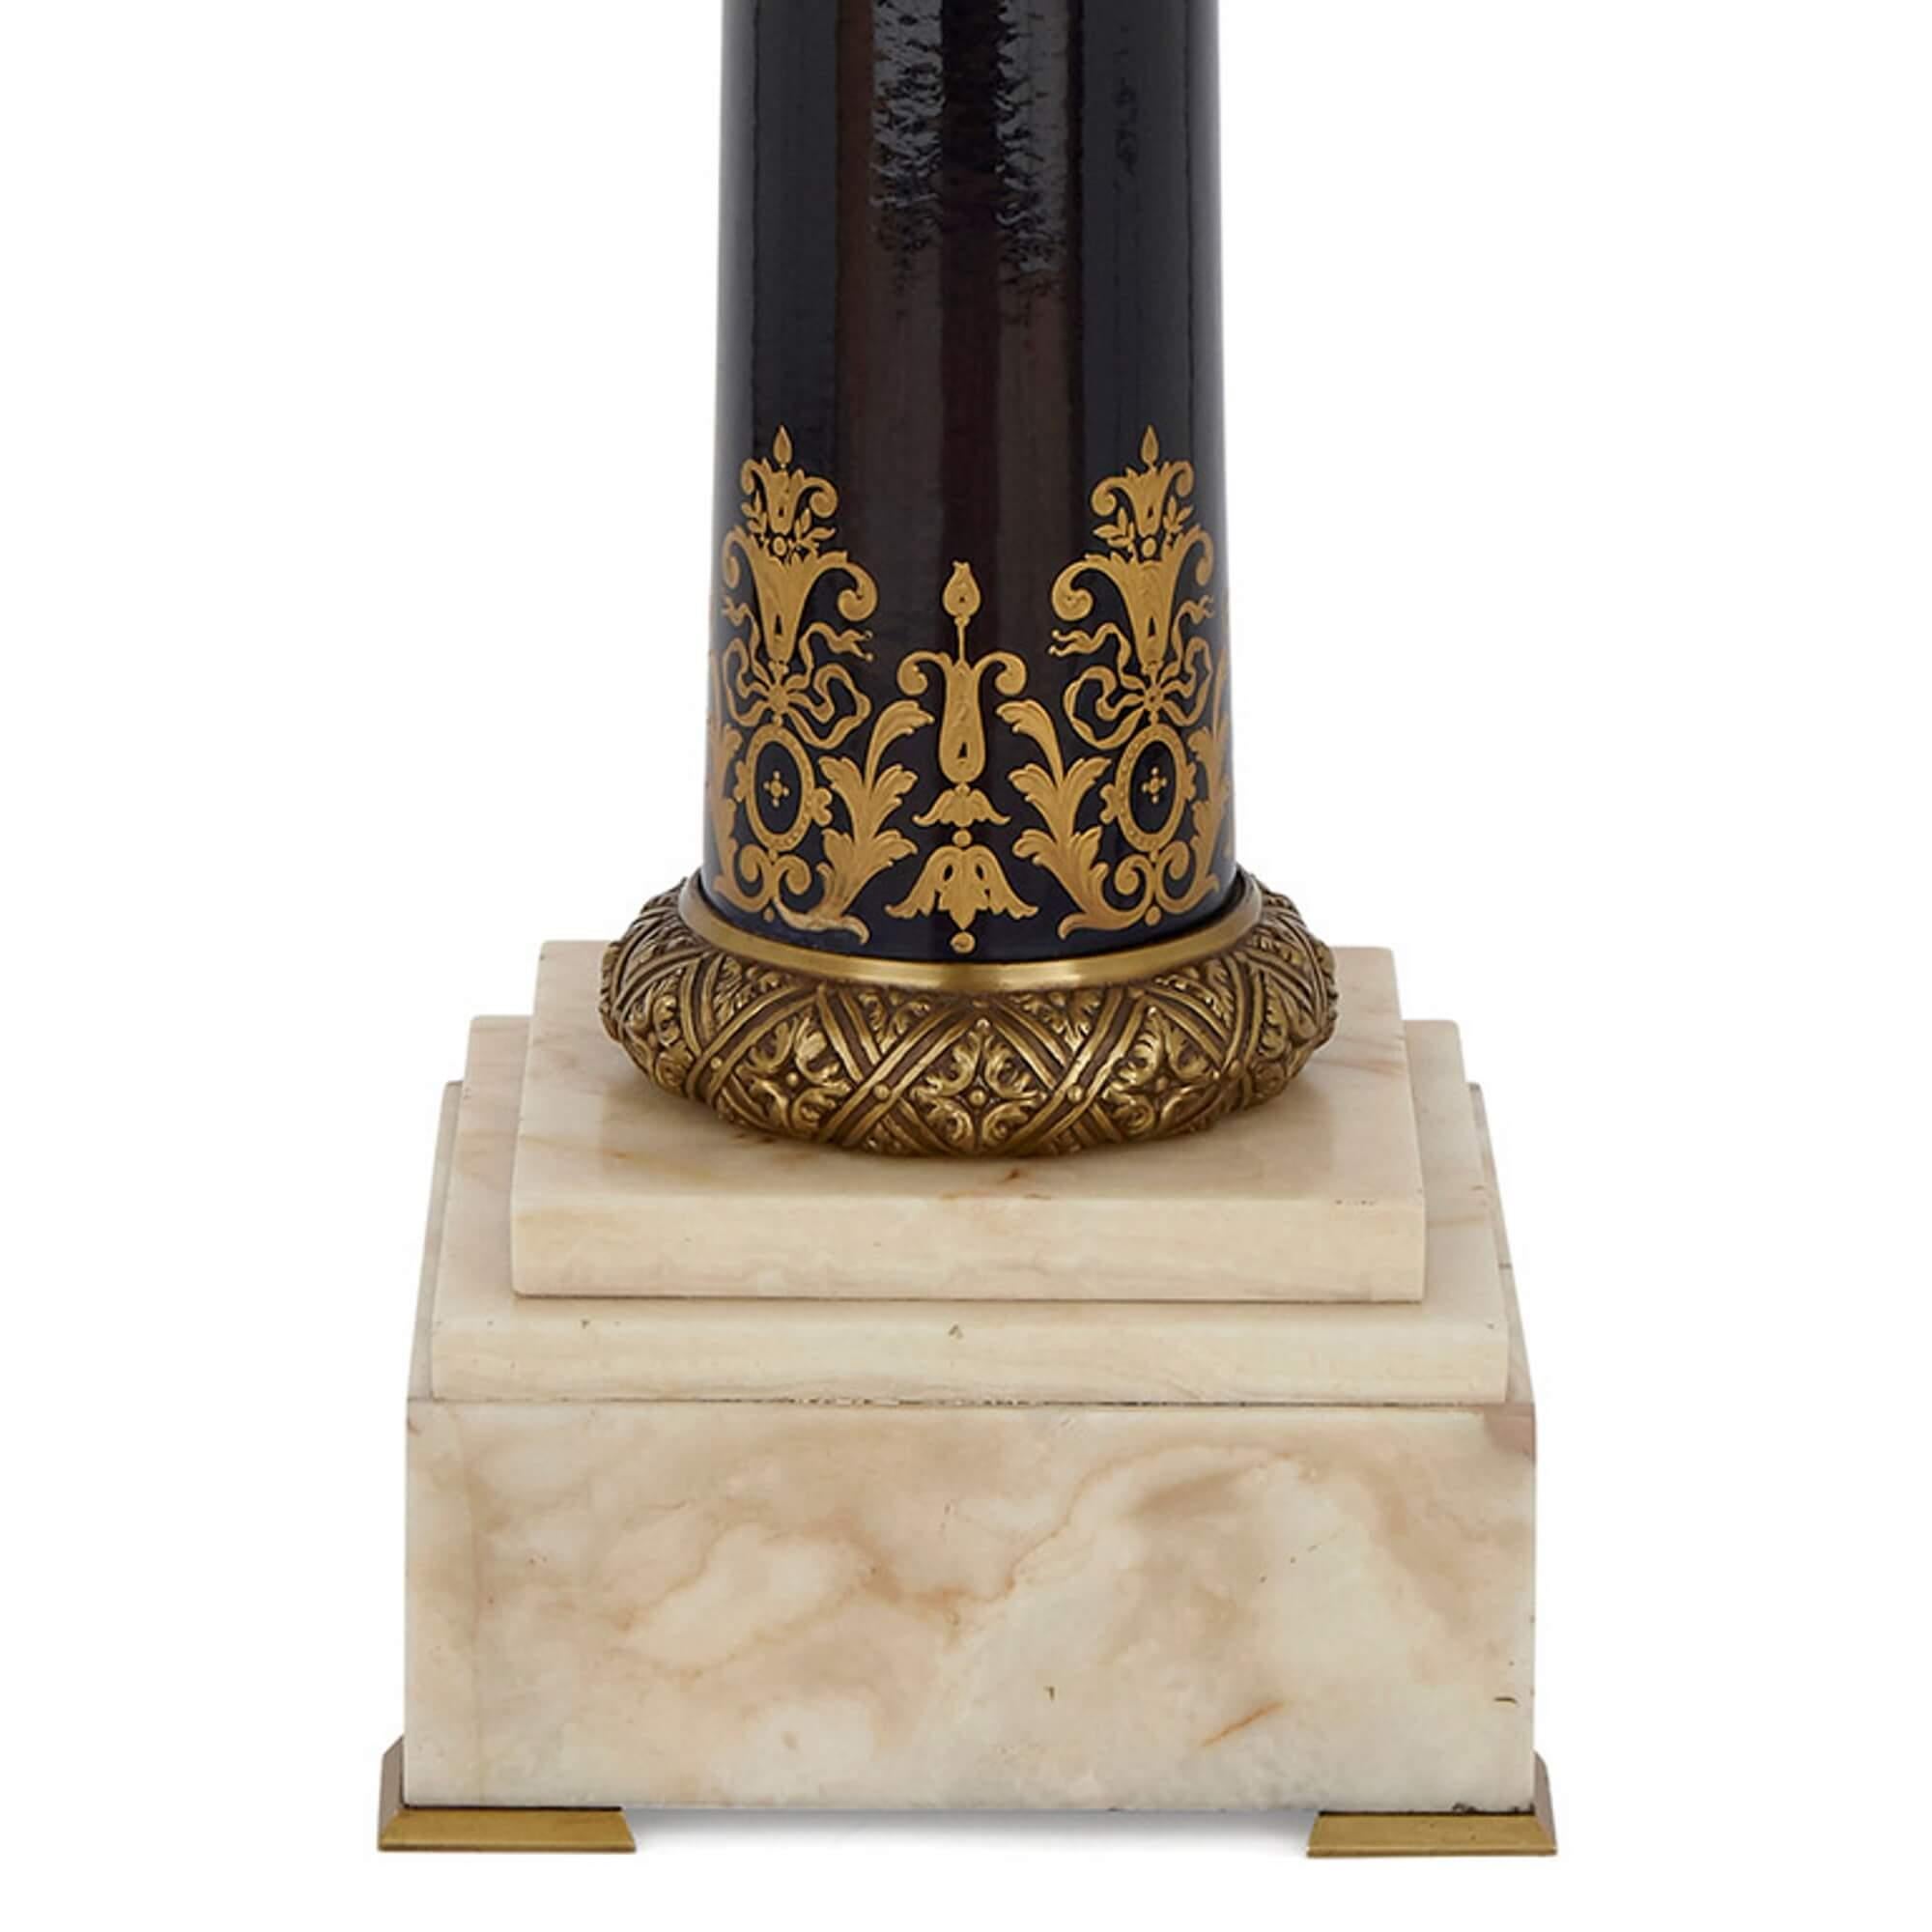 Neoclassical style marble and porcelain pedestal
French, late 19th century
Measures: Height 108cm, width 30cm, depth 30cm

This Fine column-form pedestal is crafted in the Neoclassical style from Sèvres style porcelain, gilt bronze, and marble.